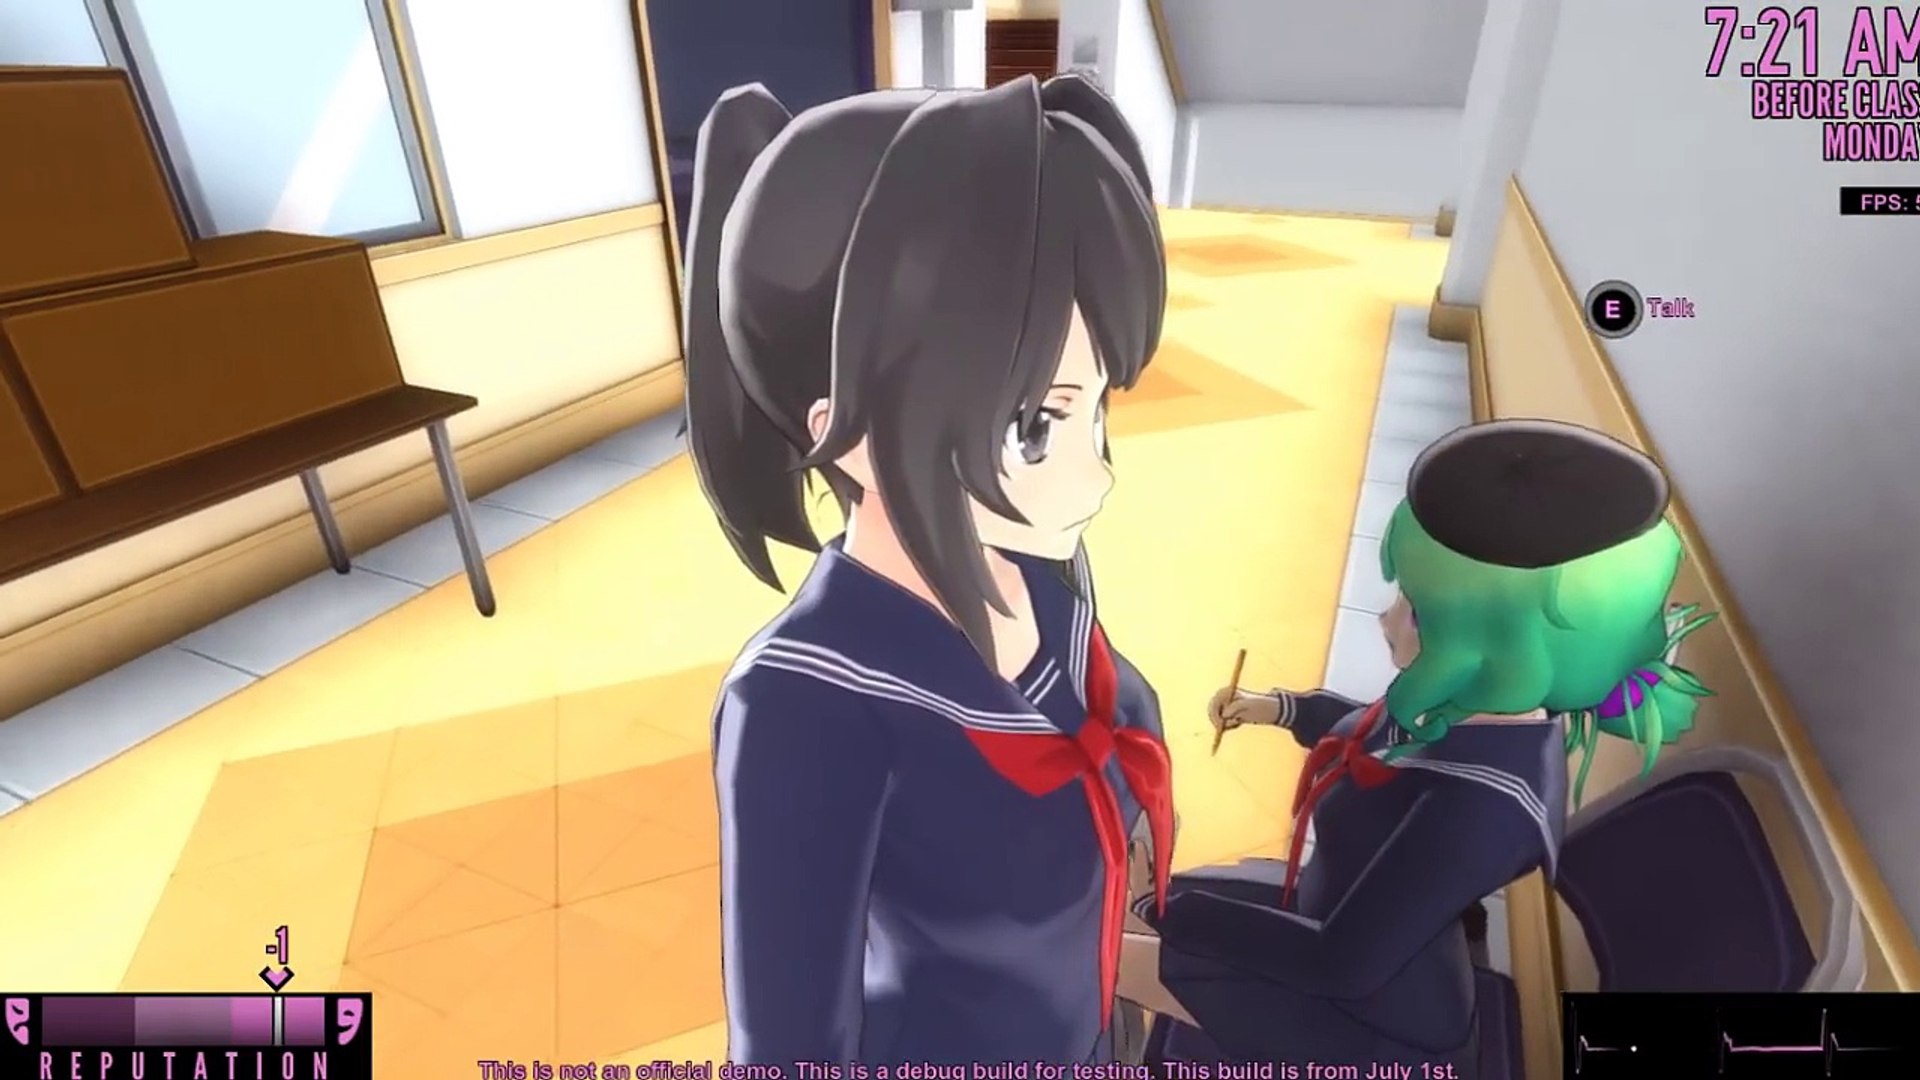 The New Science Club Leader Has Evil Plans Yandere Simulator Dailymotion Video